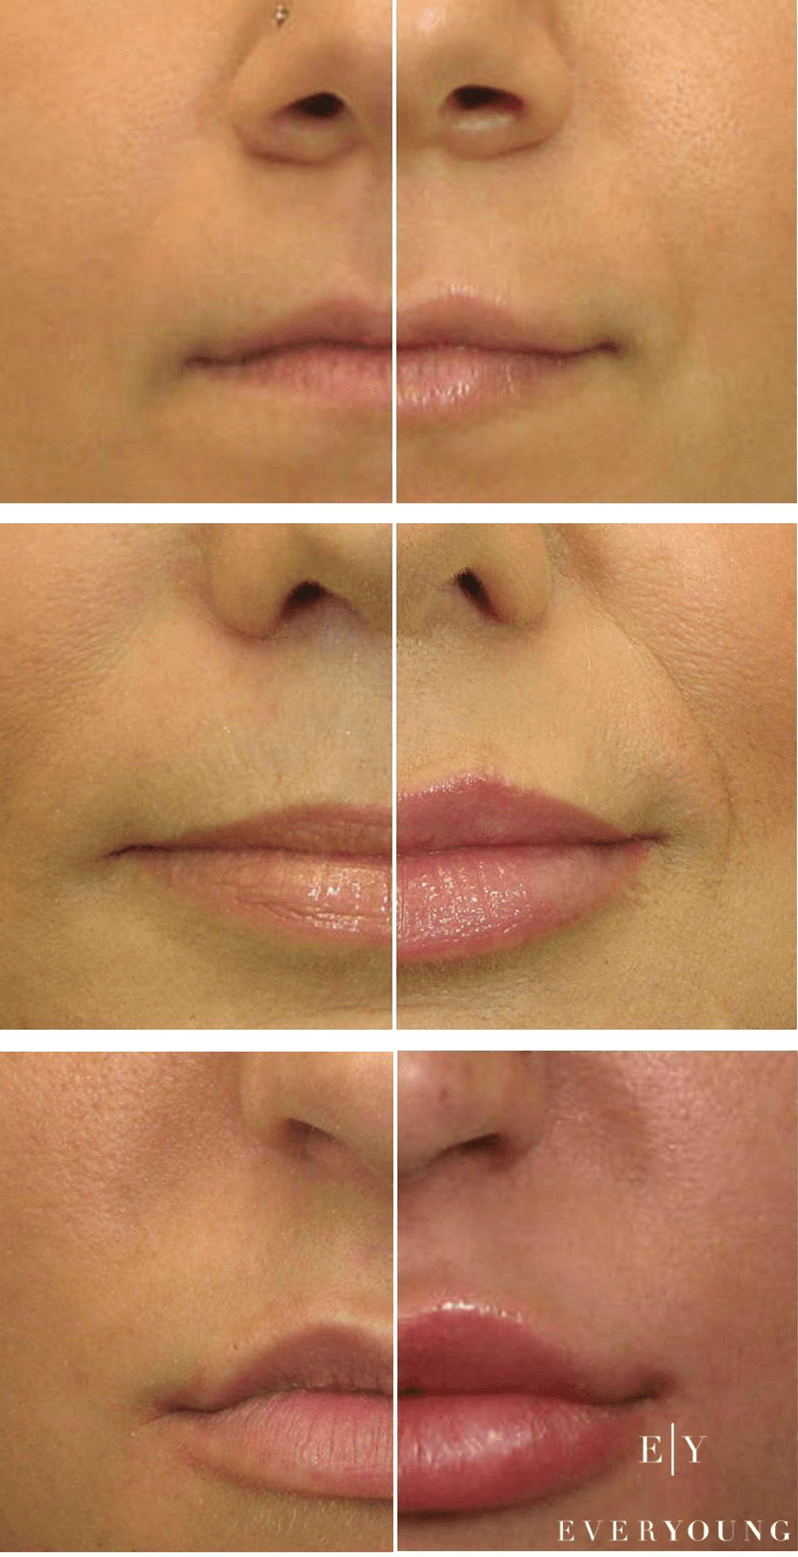 EverYoung lip augmentation mini lip to full lips lip injections coquitlam vancouver BC